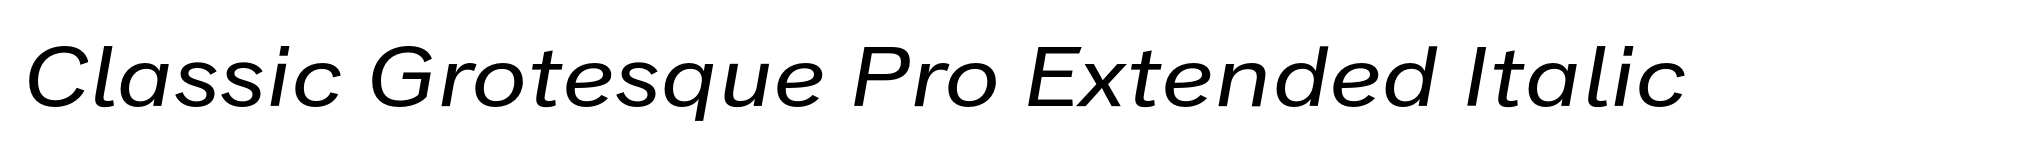 Classic Grotesque Pro Extended Italic image